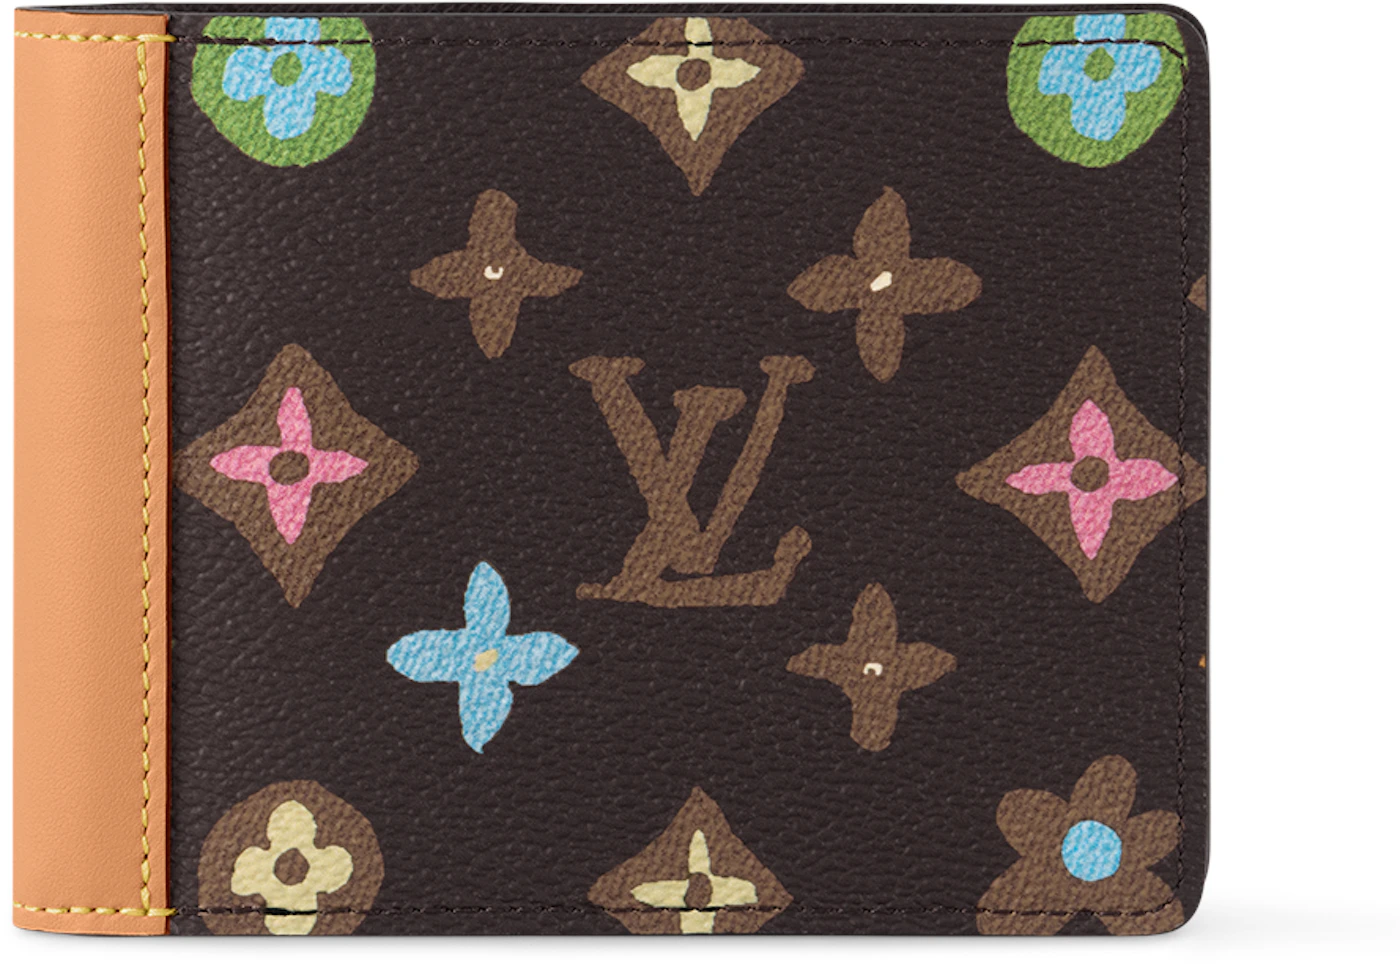 Louis Vuitton by Tyler, the Creator Multiple Wallet Chocolate Craggy ...